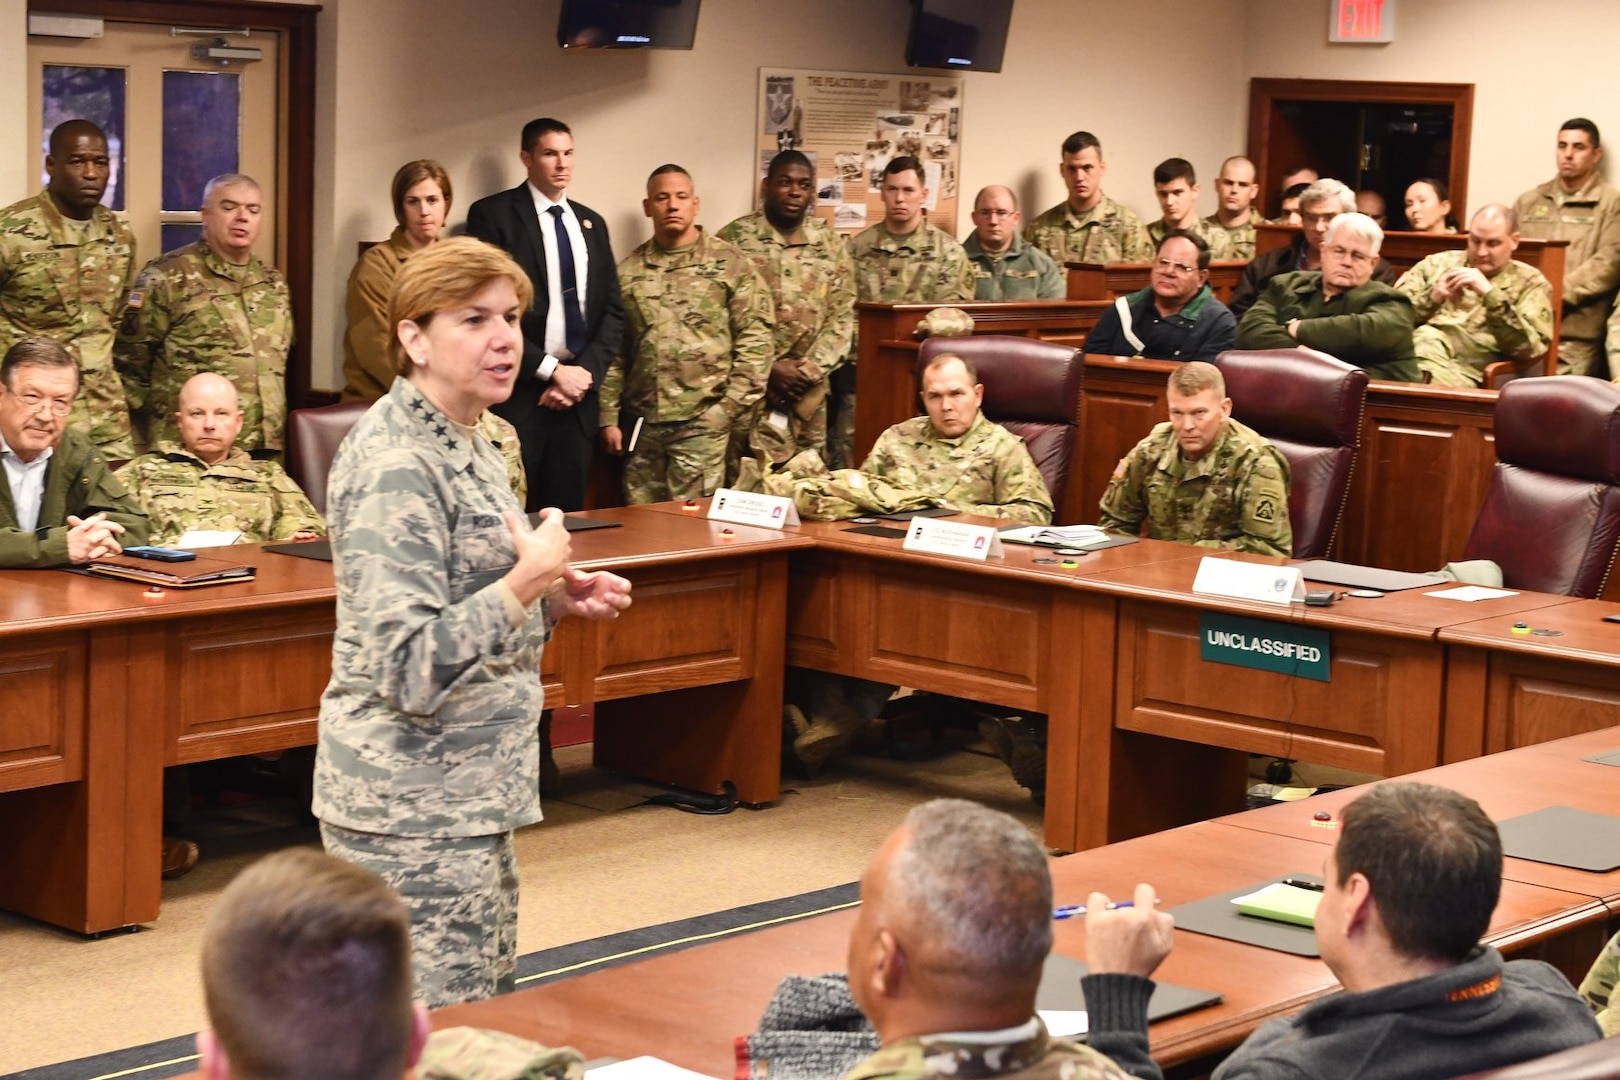 U.S. Army North (Fifth Army) hosted a town hall meeting at the historic Quadrangle Jan. 16 with Gen. Lori J. Robinson, commander, North American Aerospace Defense Command and United States Northern Command.